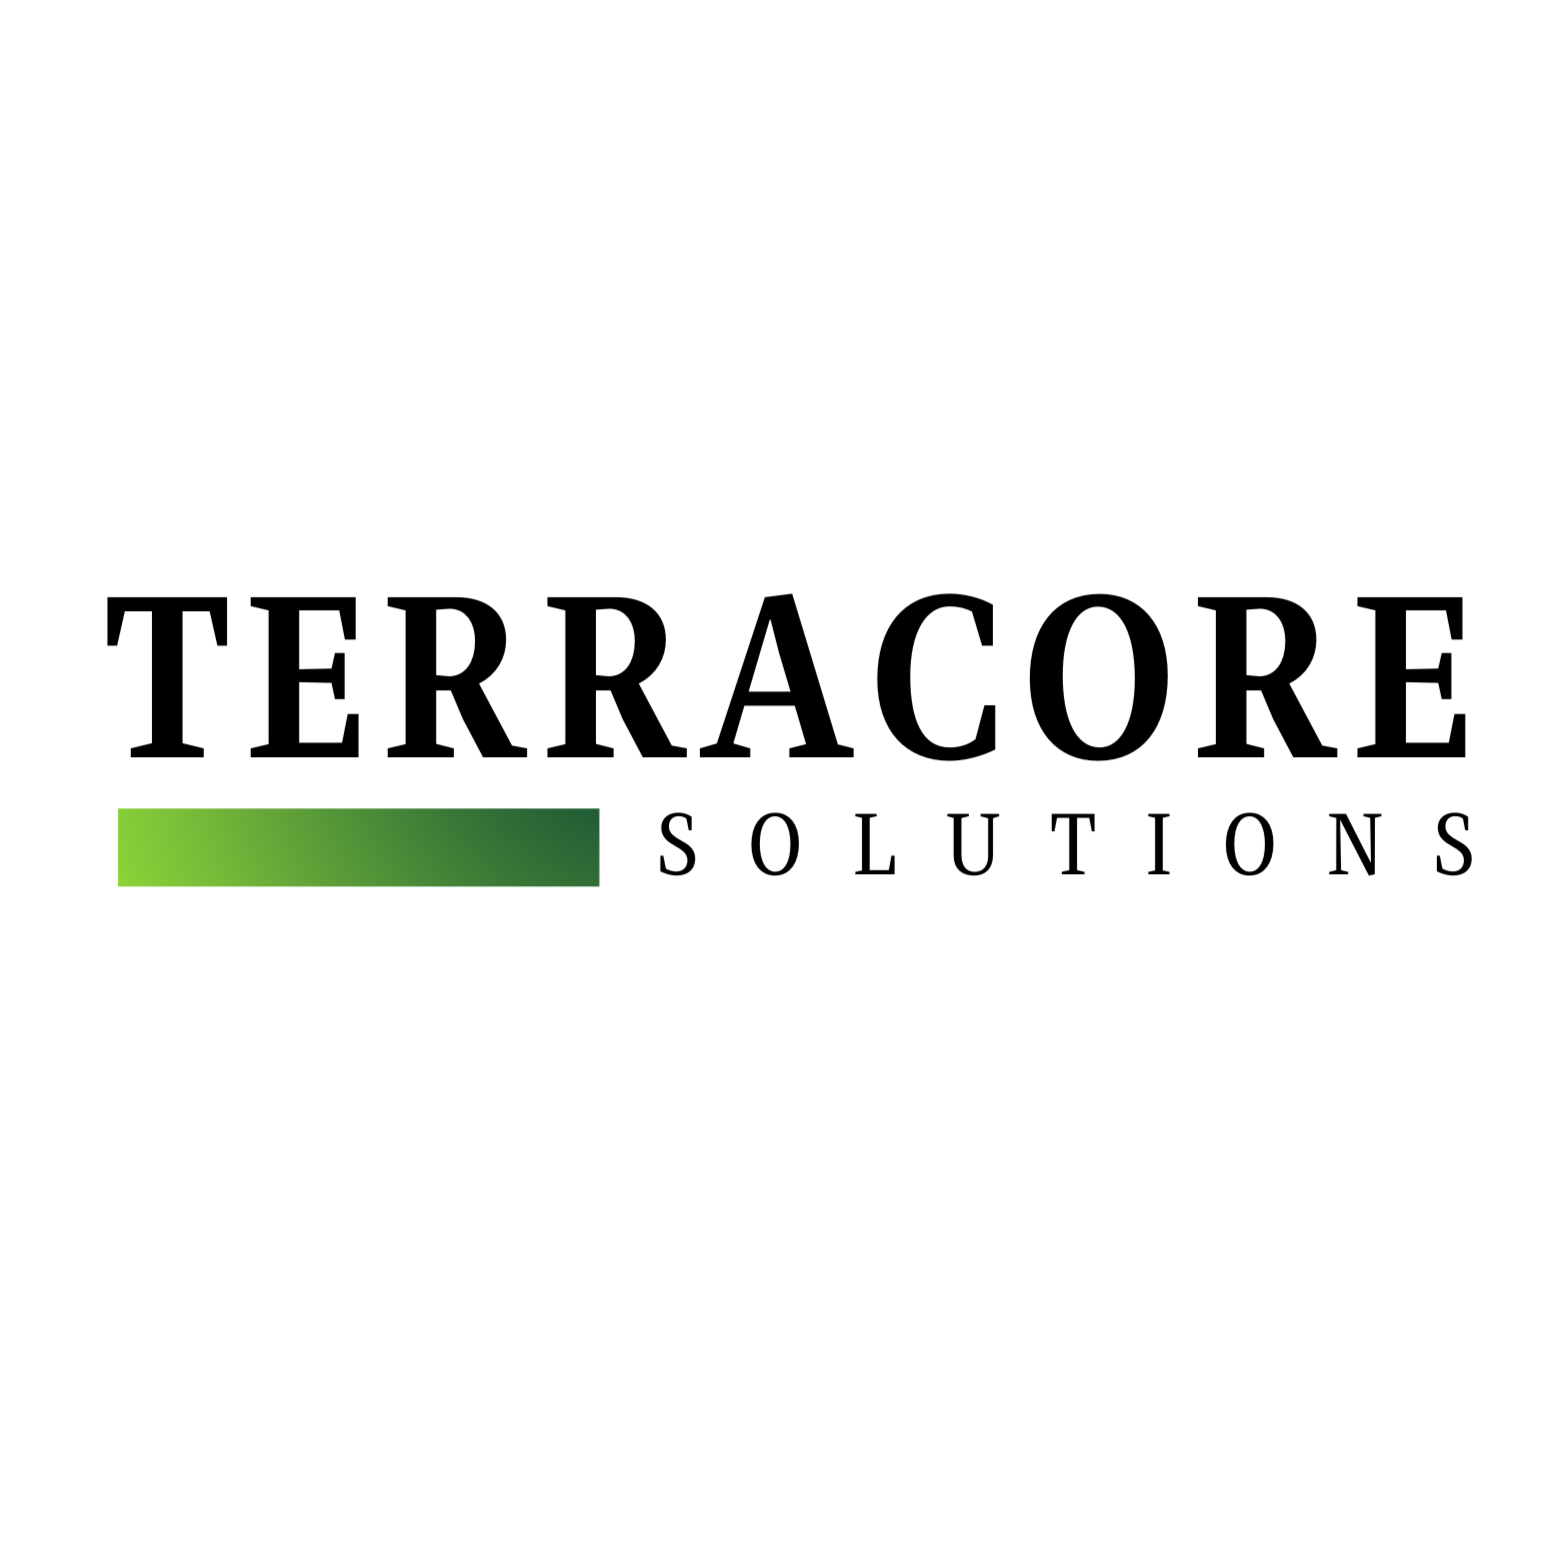 TerraCore Solutions